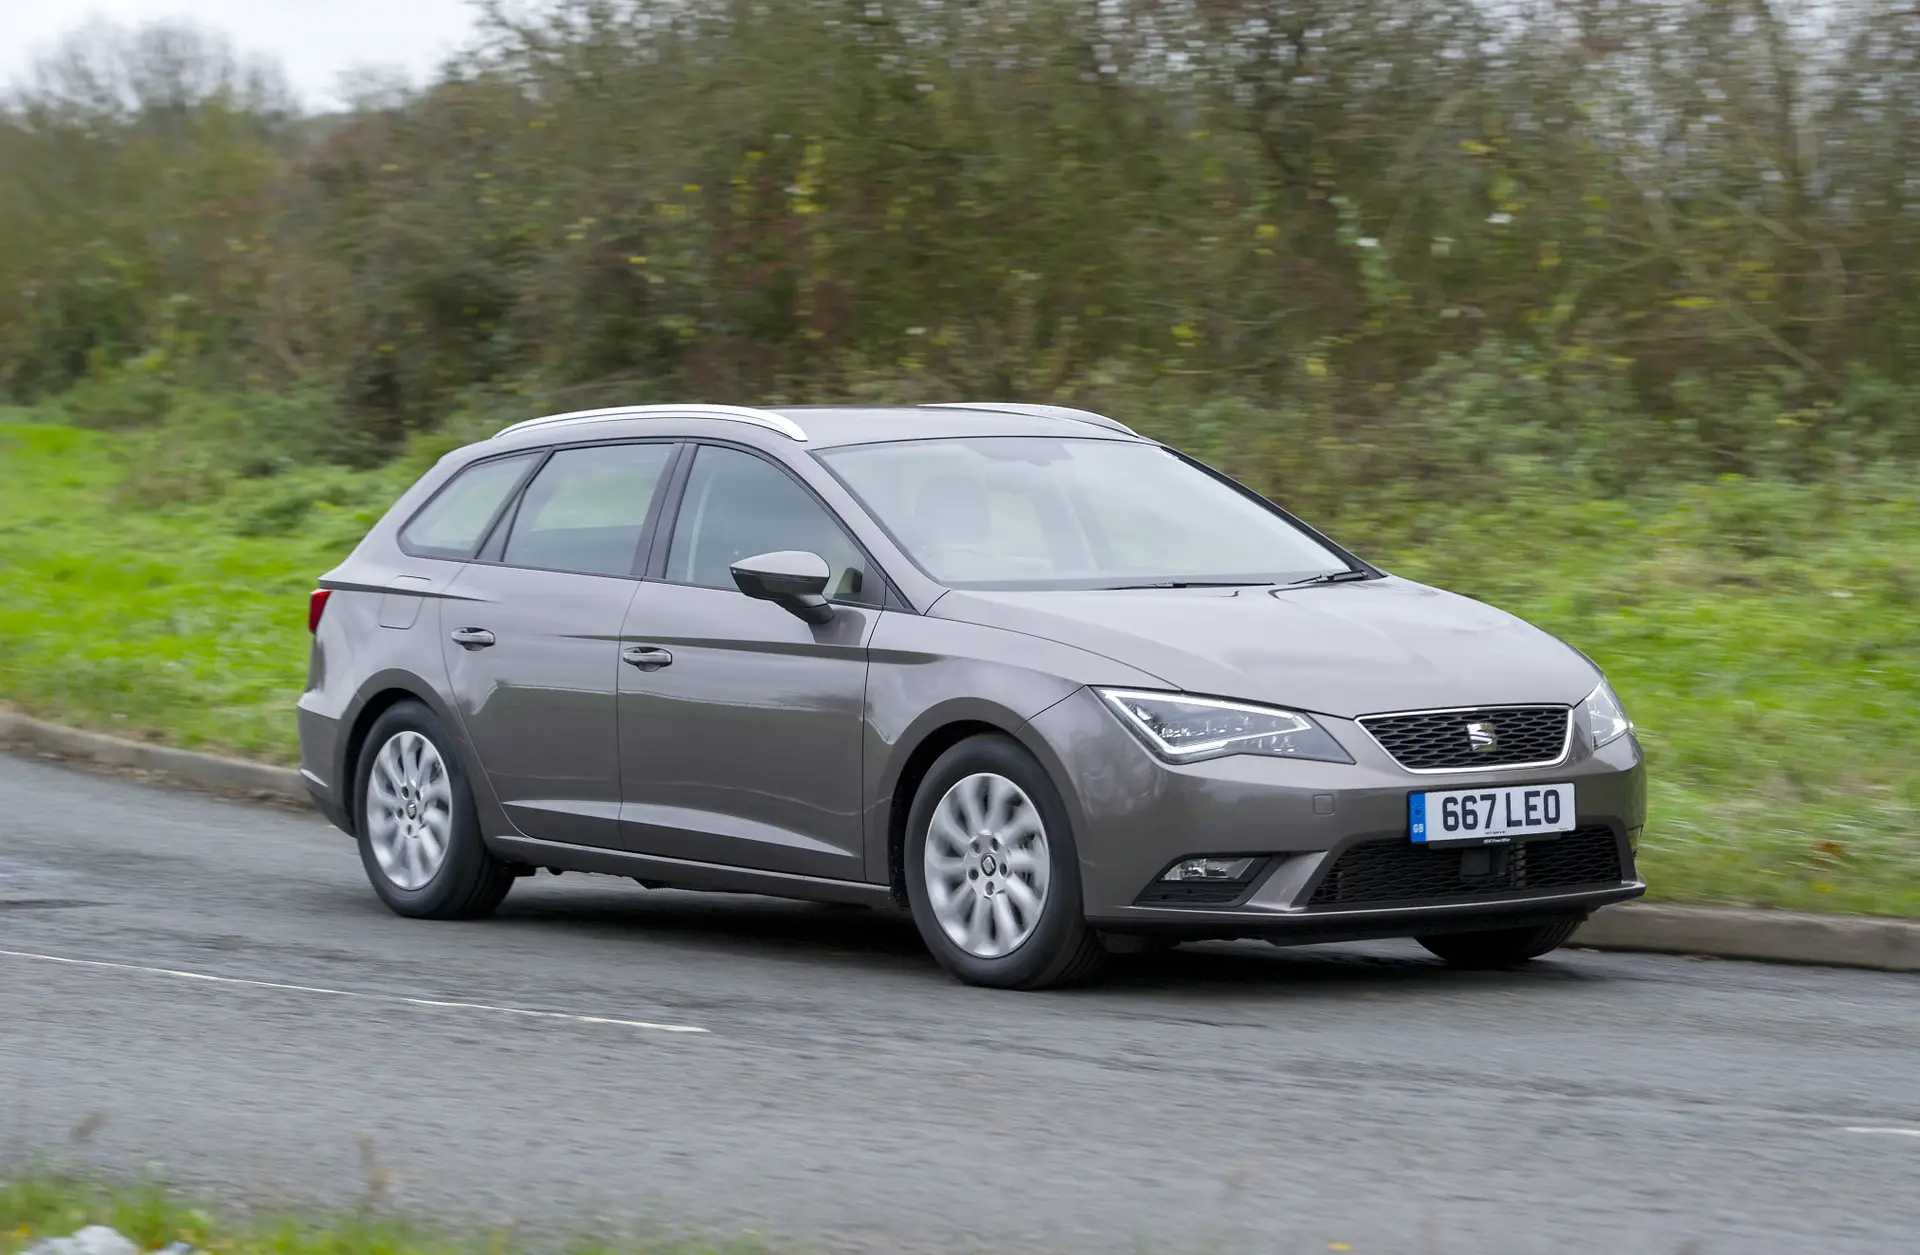 SEAT Leon ST (2014-2020) Review: exterior front three quarter photo of the SEAT Leon ST on the road